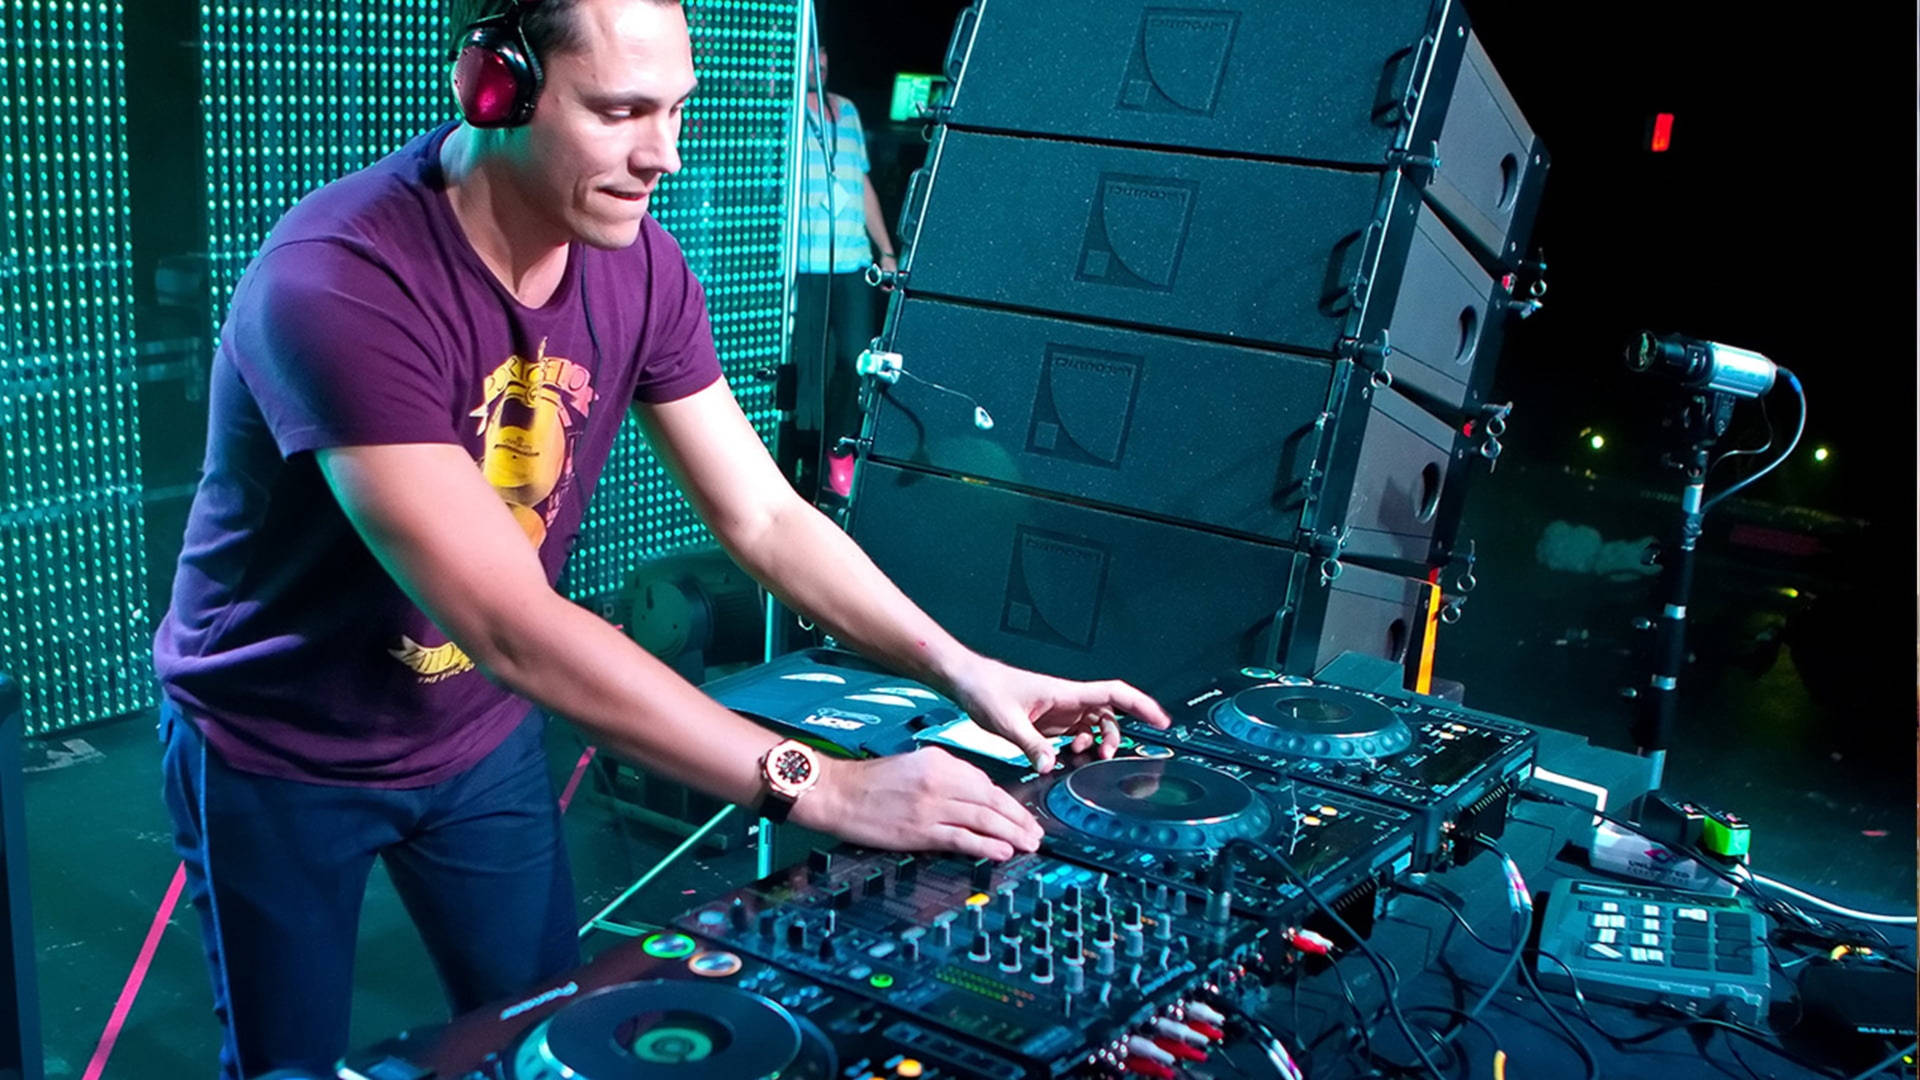 Tiesto In Dj Booth Background